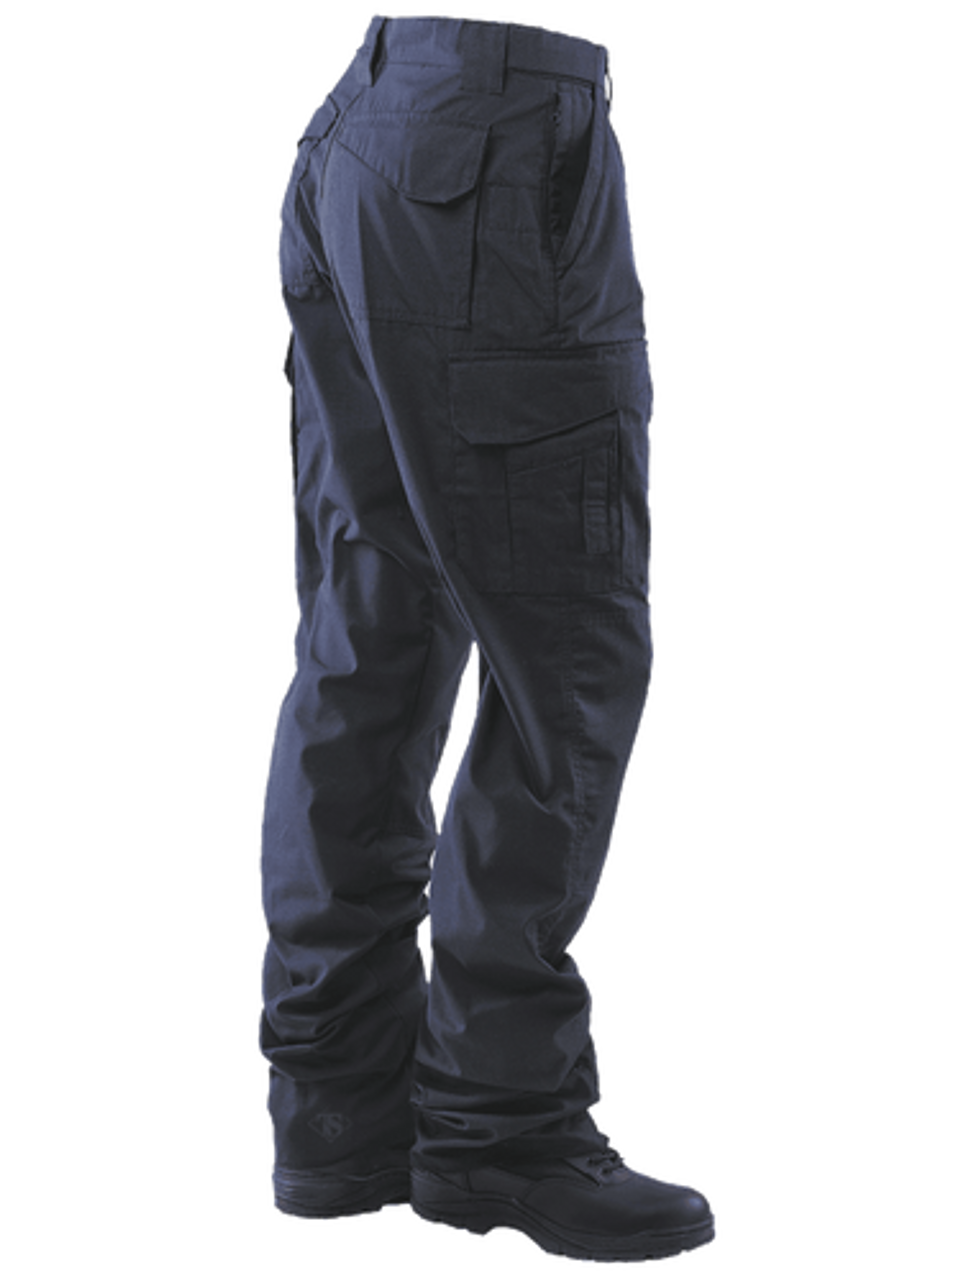 Tru-Spec 24-7 SERIES TS-1120 Men's EMS Tactical Pants, Extra deep front pockets, Uniform/Cargo, Strechable Waistband, Relaxed, Zipper Pocket, Expandable back pockets with hook and loop closure, Unhemmed Length, available in navy and black